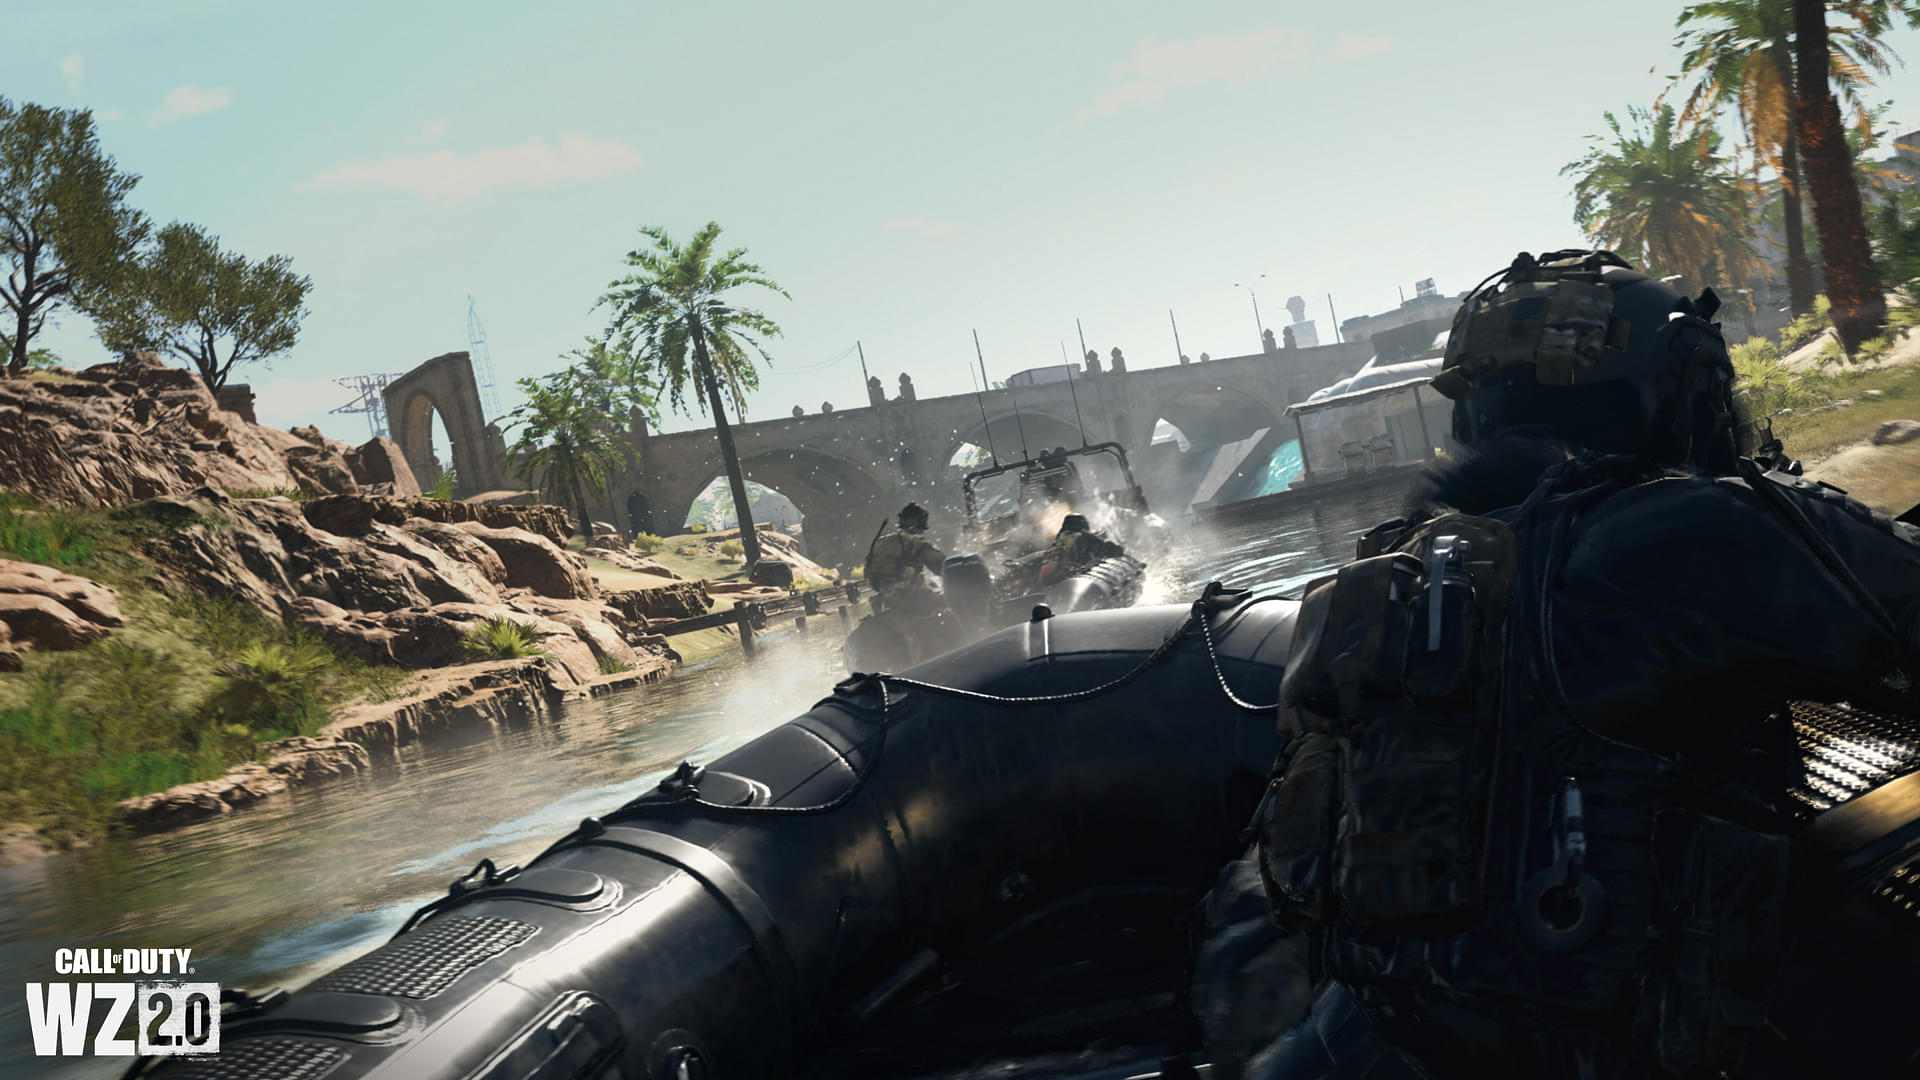 An image of a Chaotic Battlefield in Warzone 2